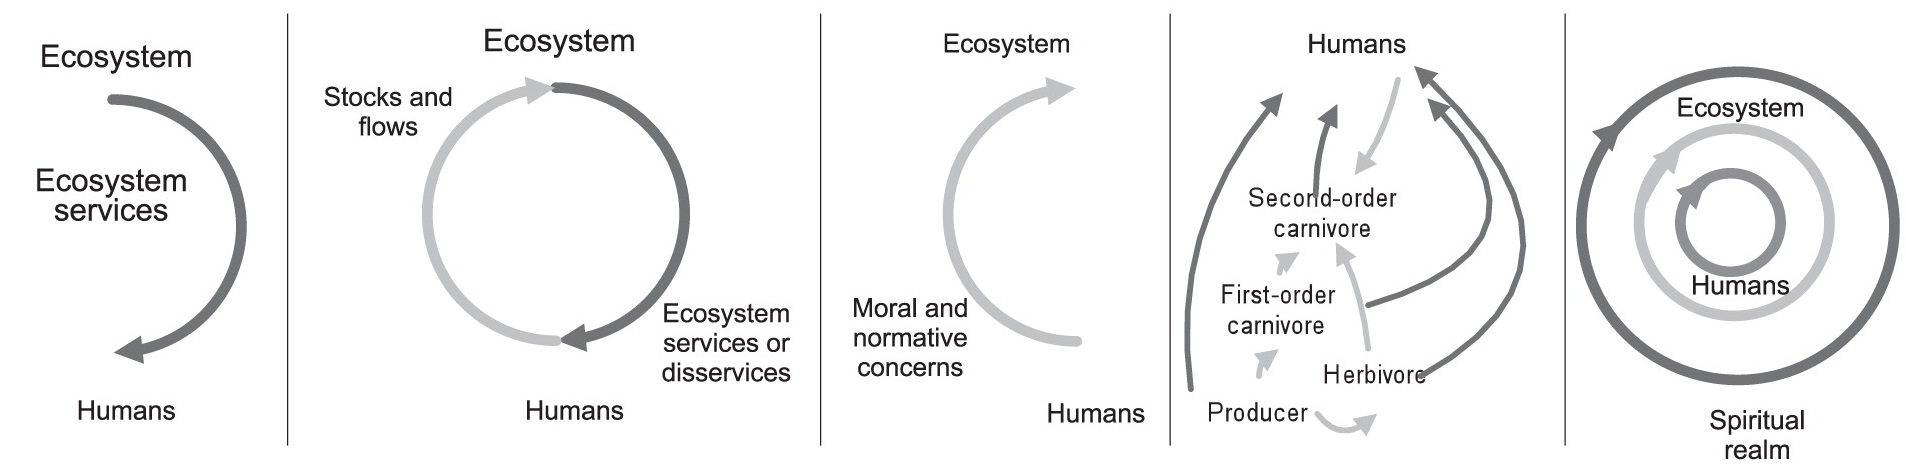 the relationship between humans and the environment